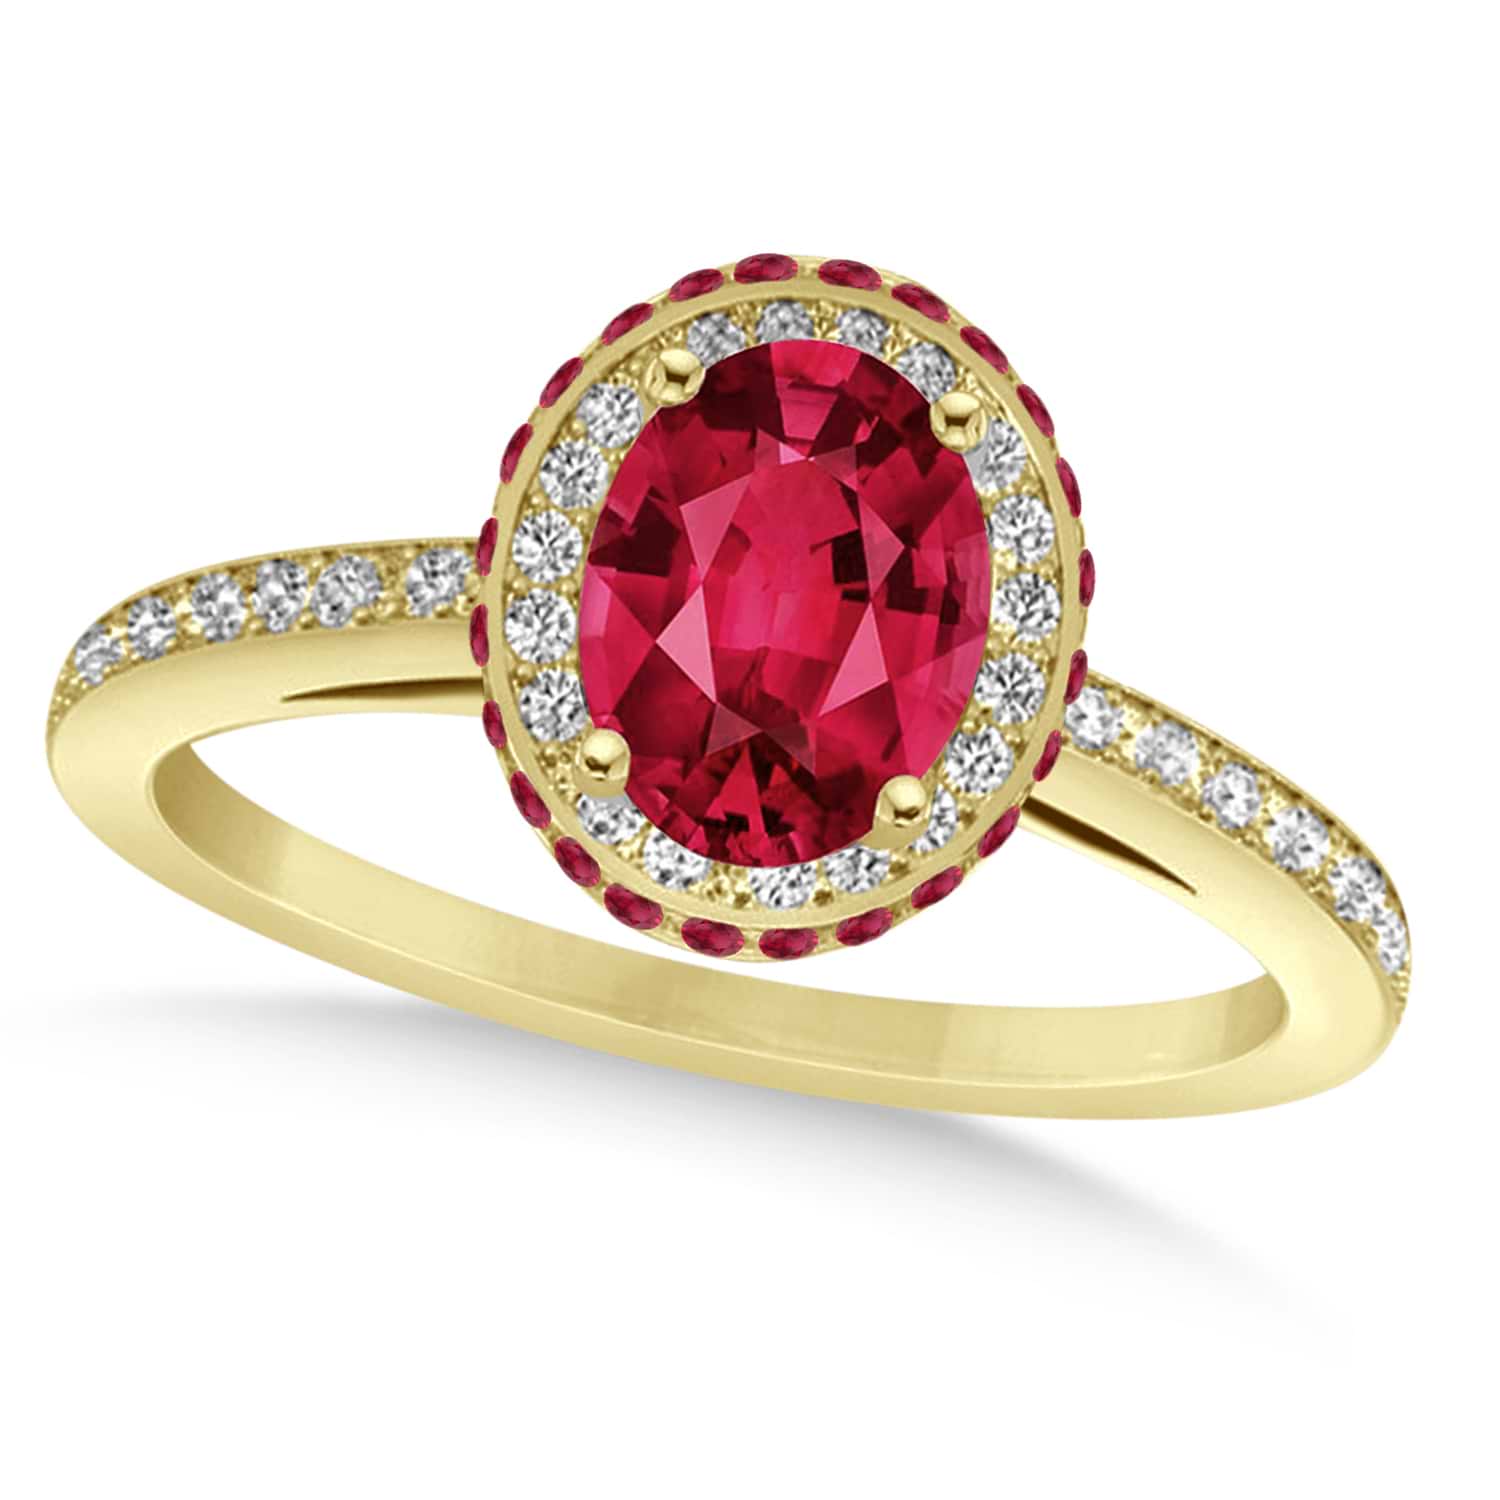 Oval Ruby & Diamond Halo Engagement Ring 14k Yellow Gold 2ct - NG11123